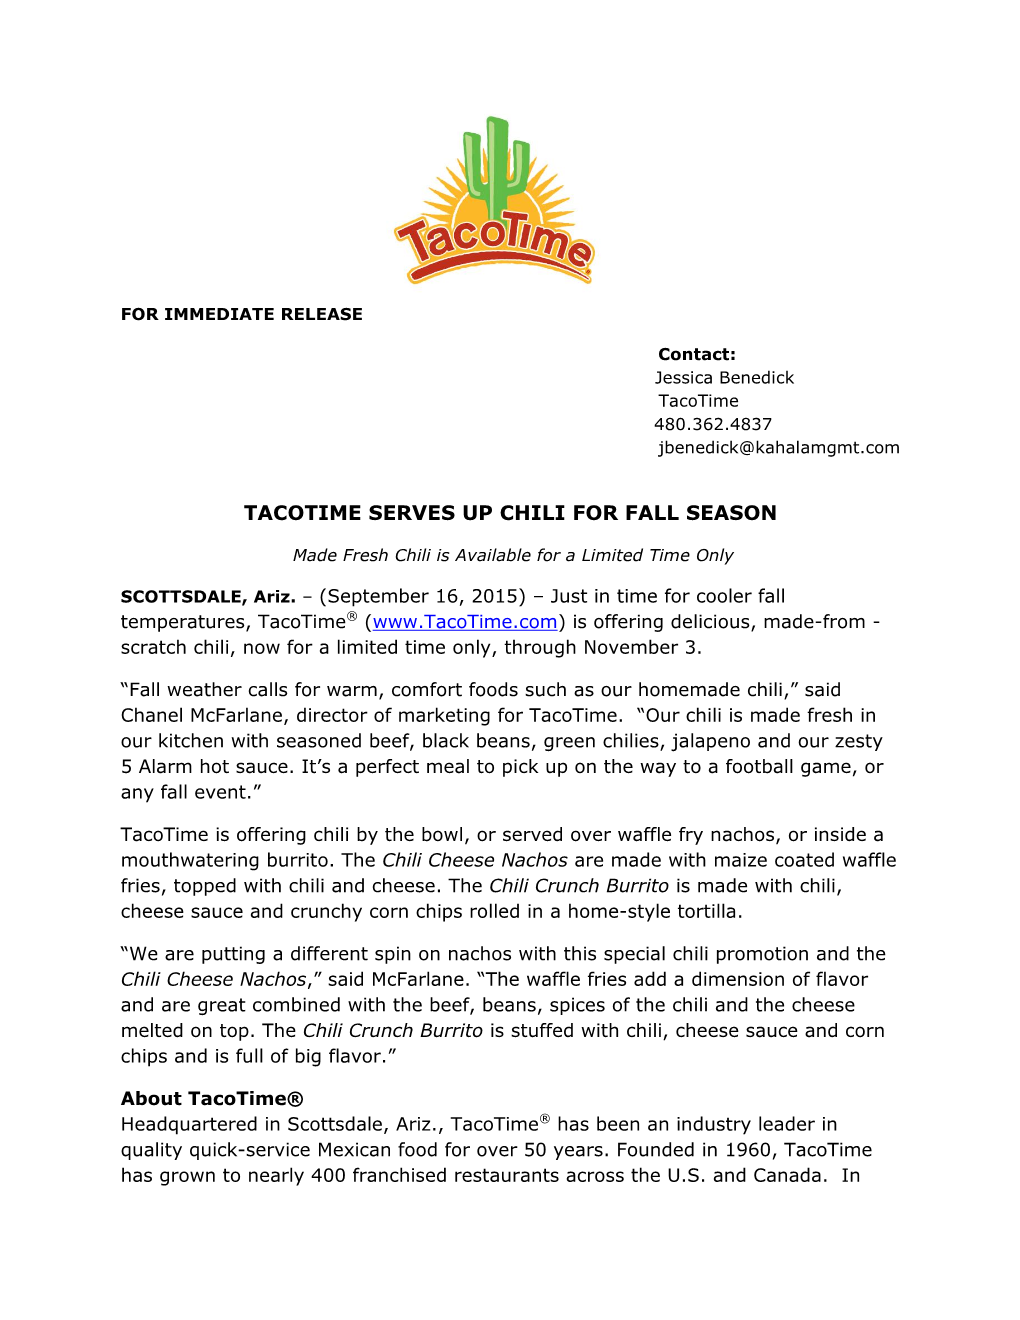 Tacotime Serves up Chili for Fall Season